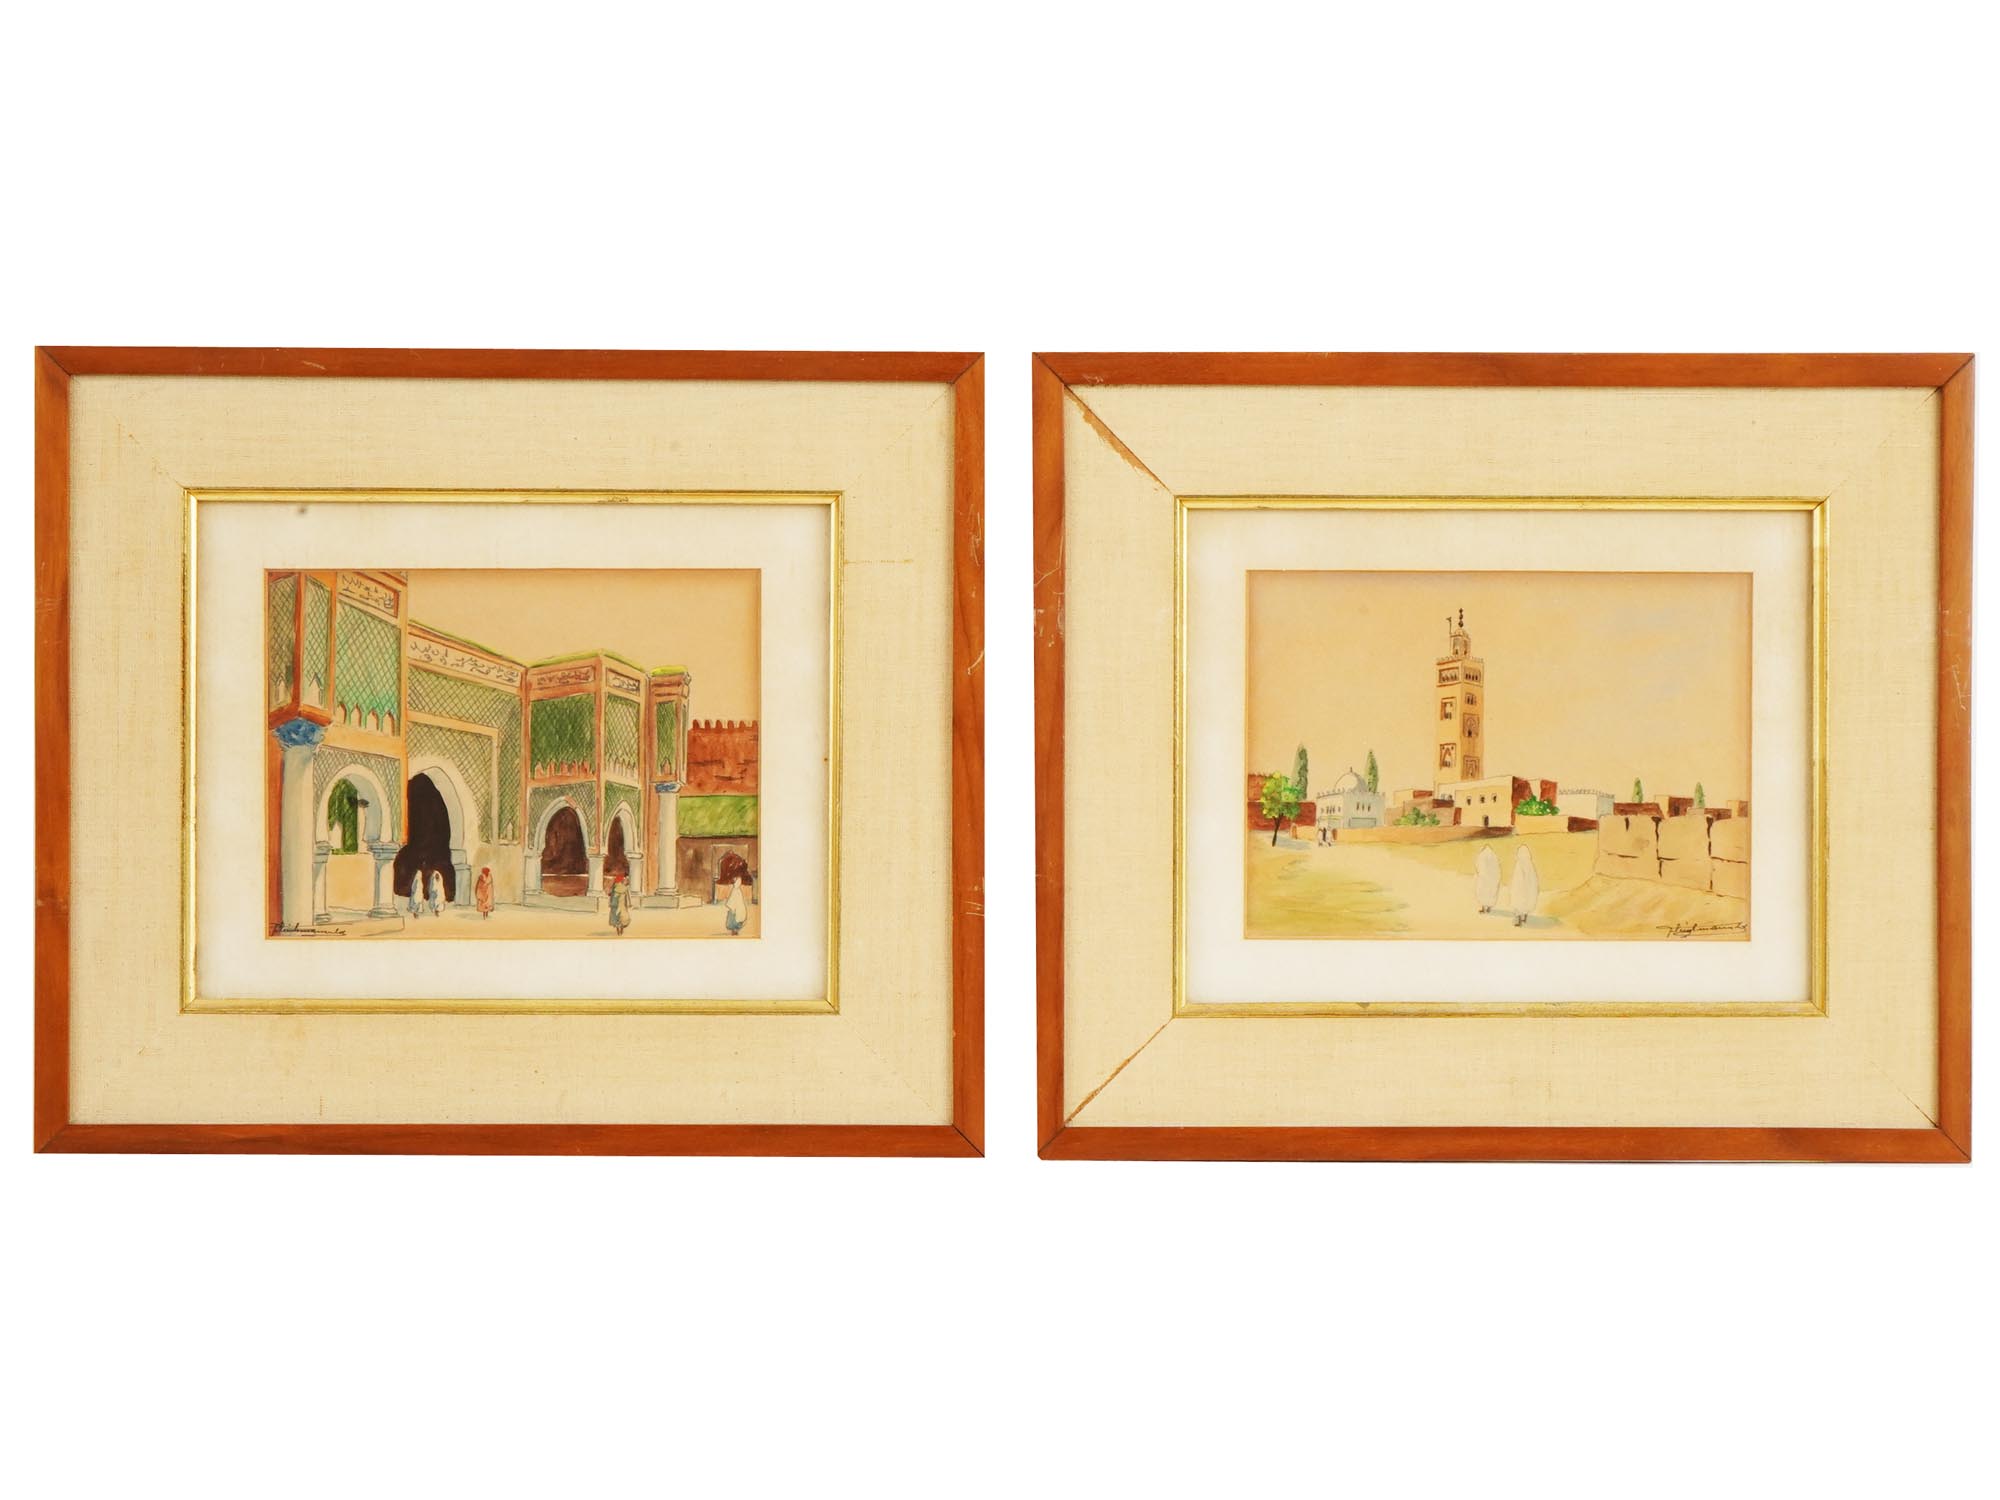 ANTIQUE MOROCCO WATERCOLOR PAINTINGS BY FLEISCHMANN PIC-0